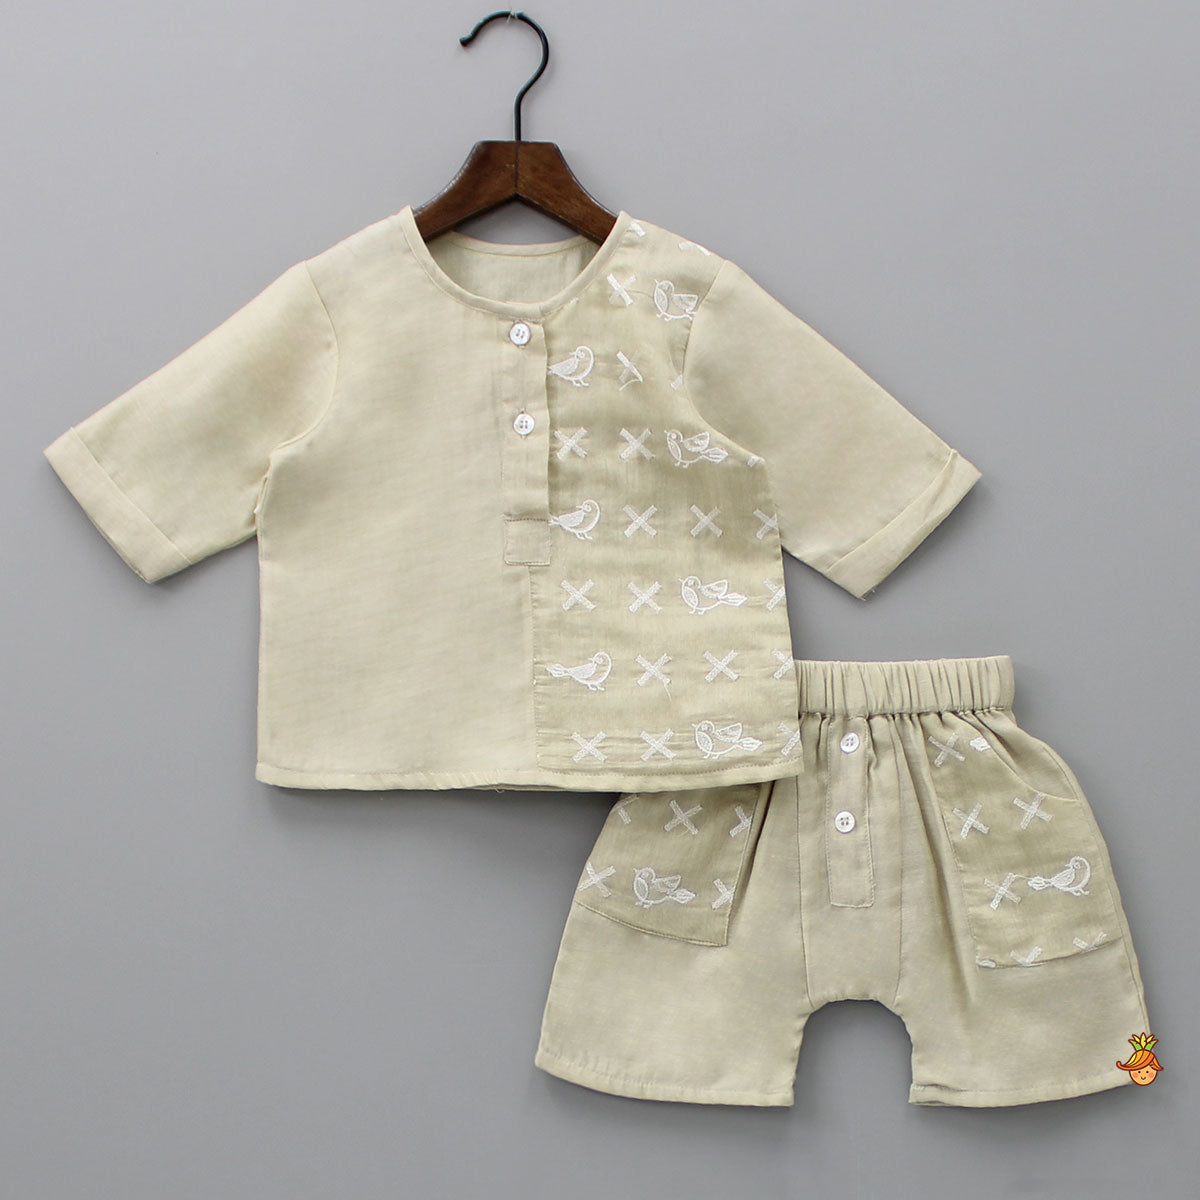 Bird Embroidered Top And Shorts